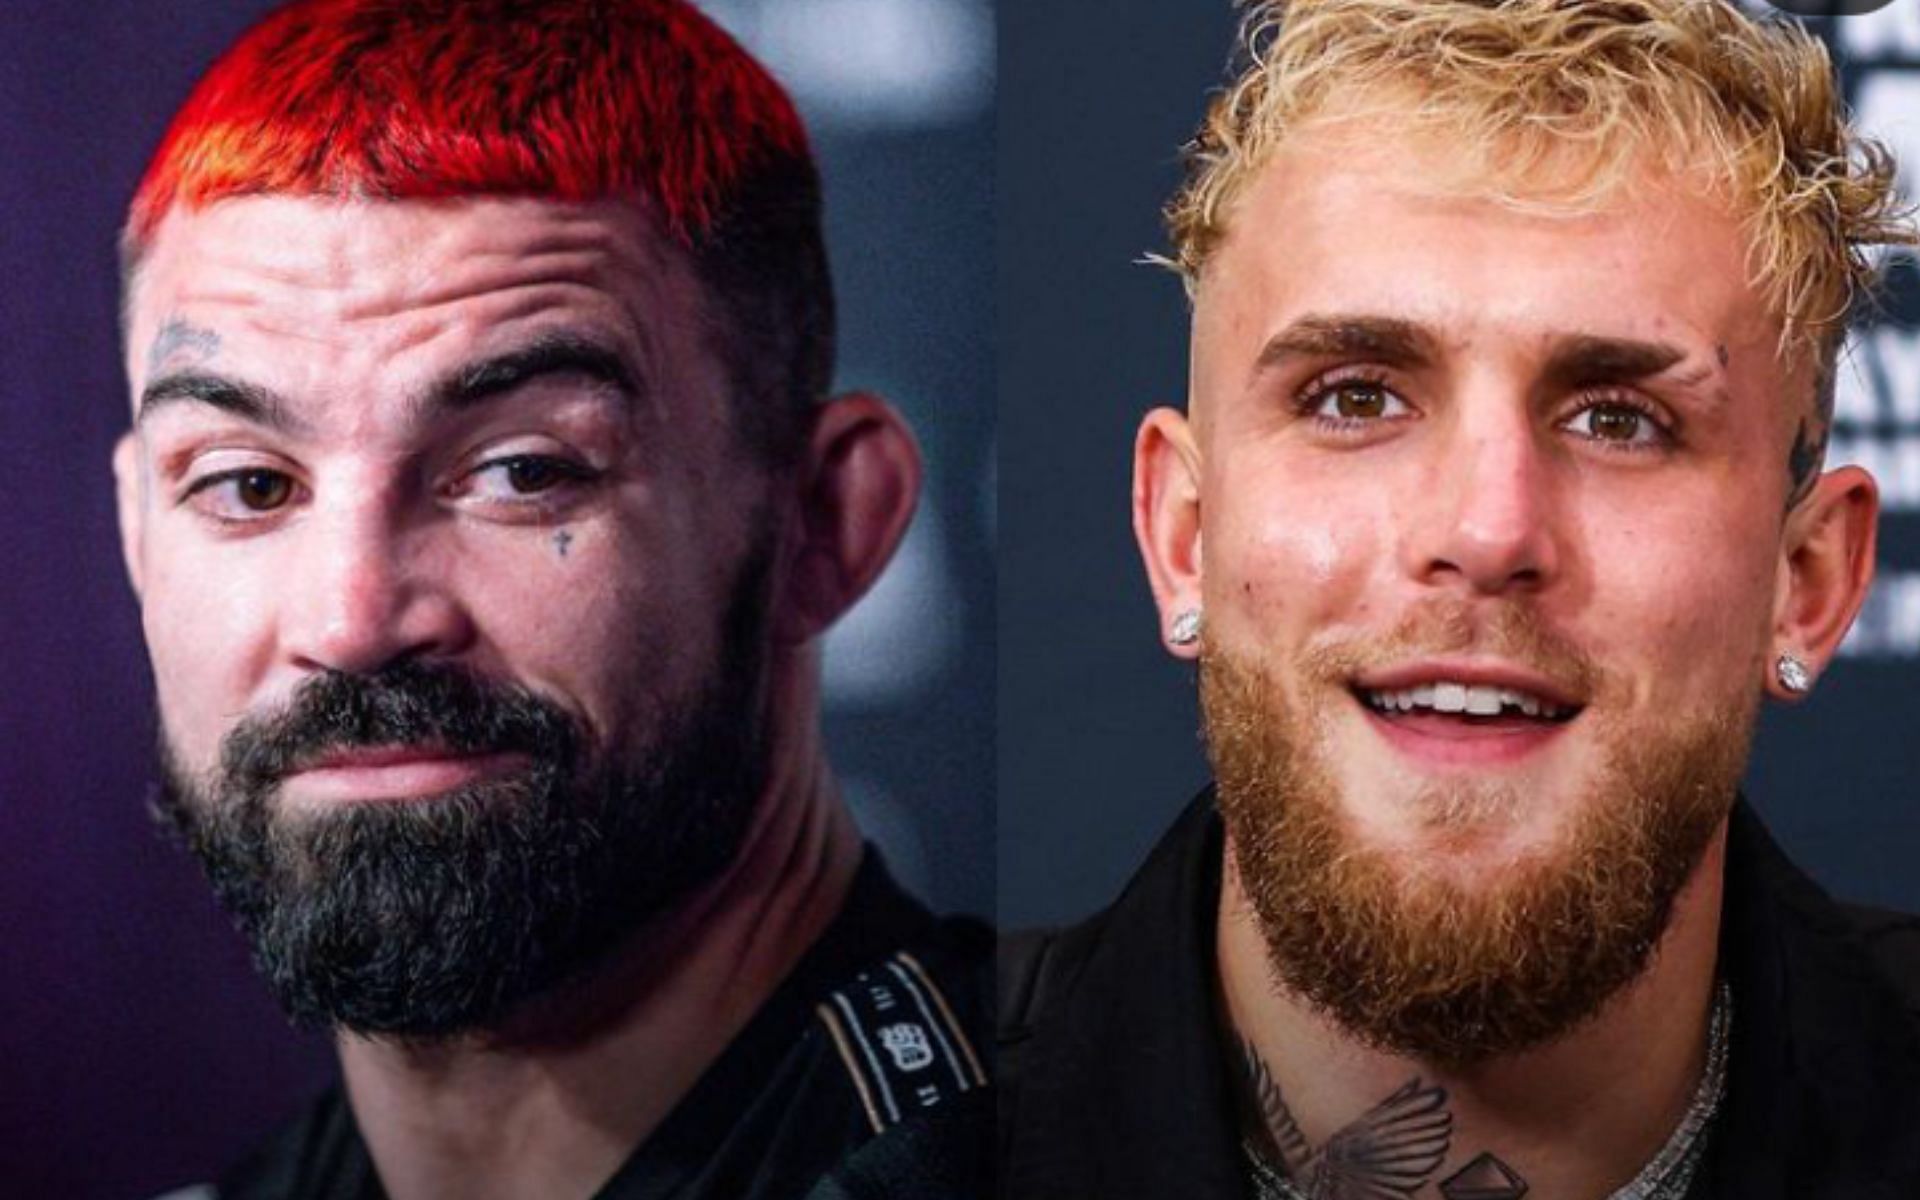 Mike Perry (L) and Jake Paul (R) [Image Courtesy: @platinummikeperry on Instagram]